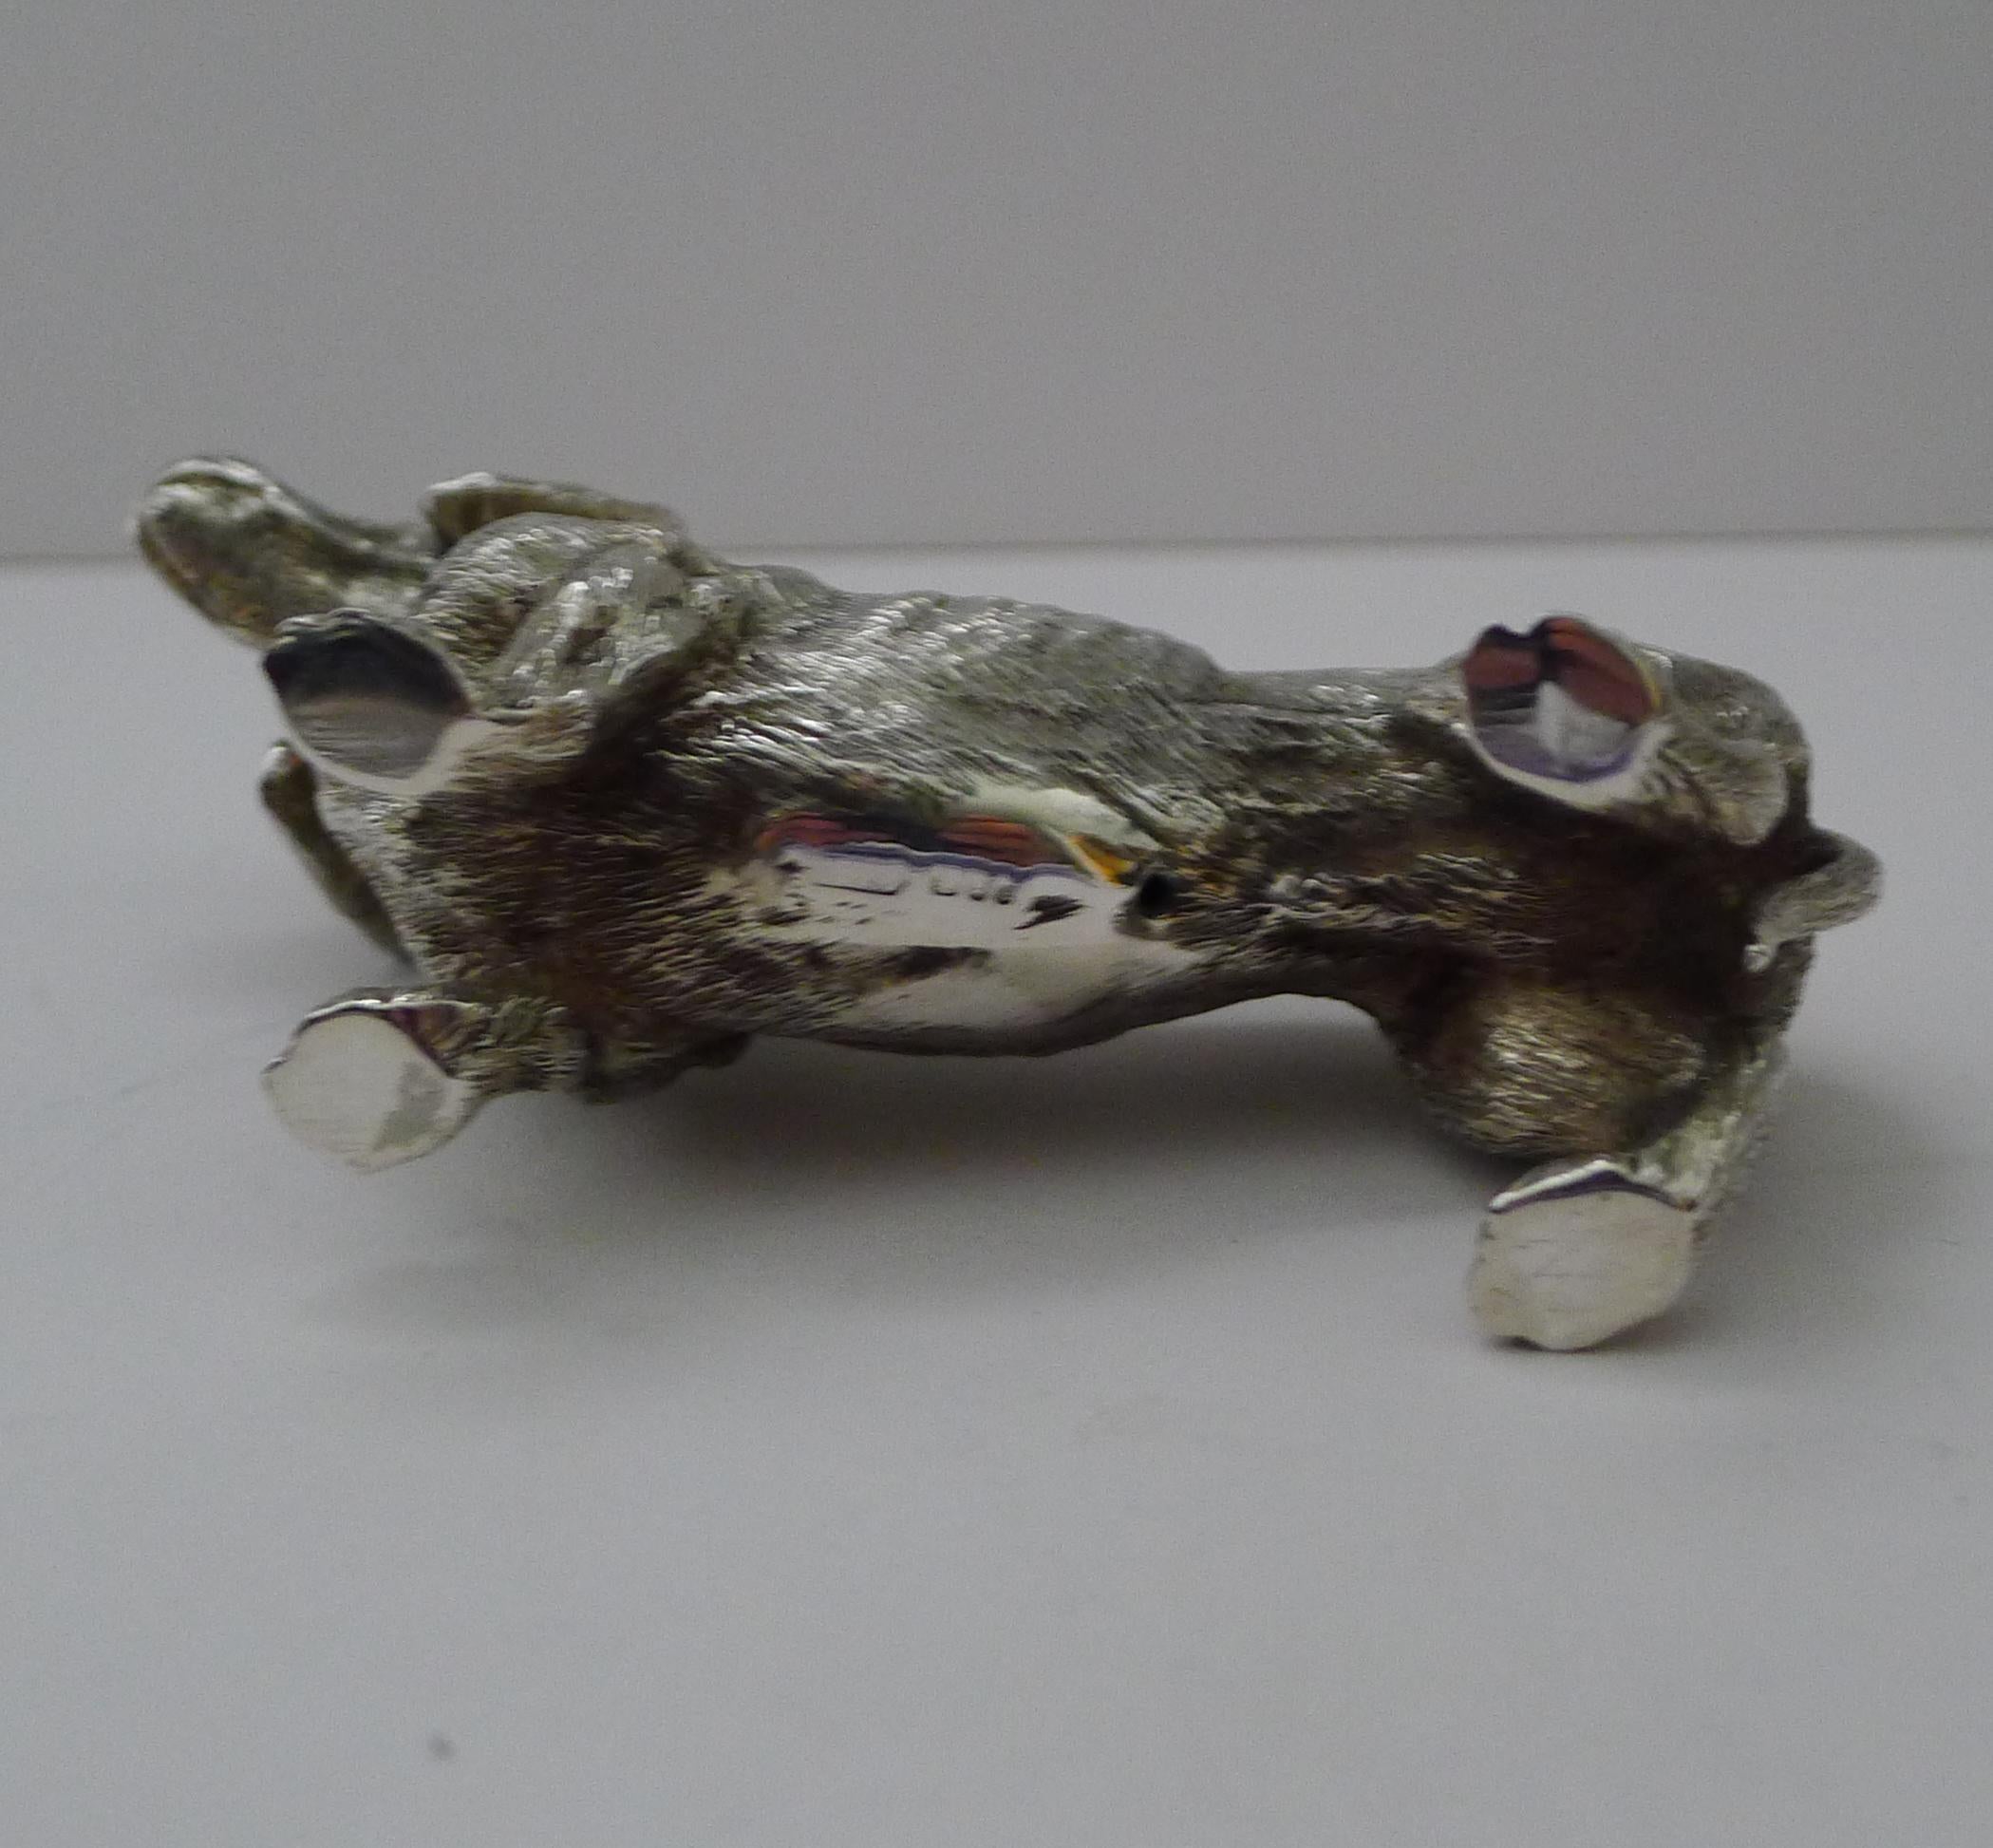 Vintage Solid Silver Dachshund by SMD Castings - 1975 For Sale 1